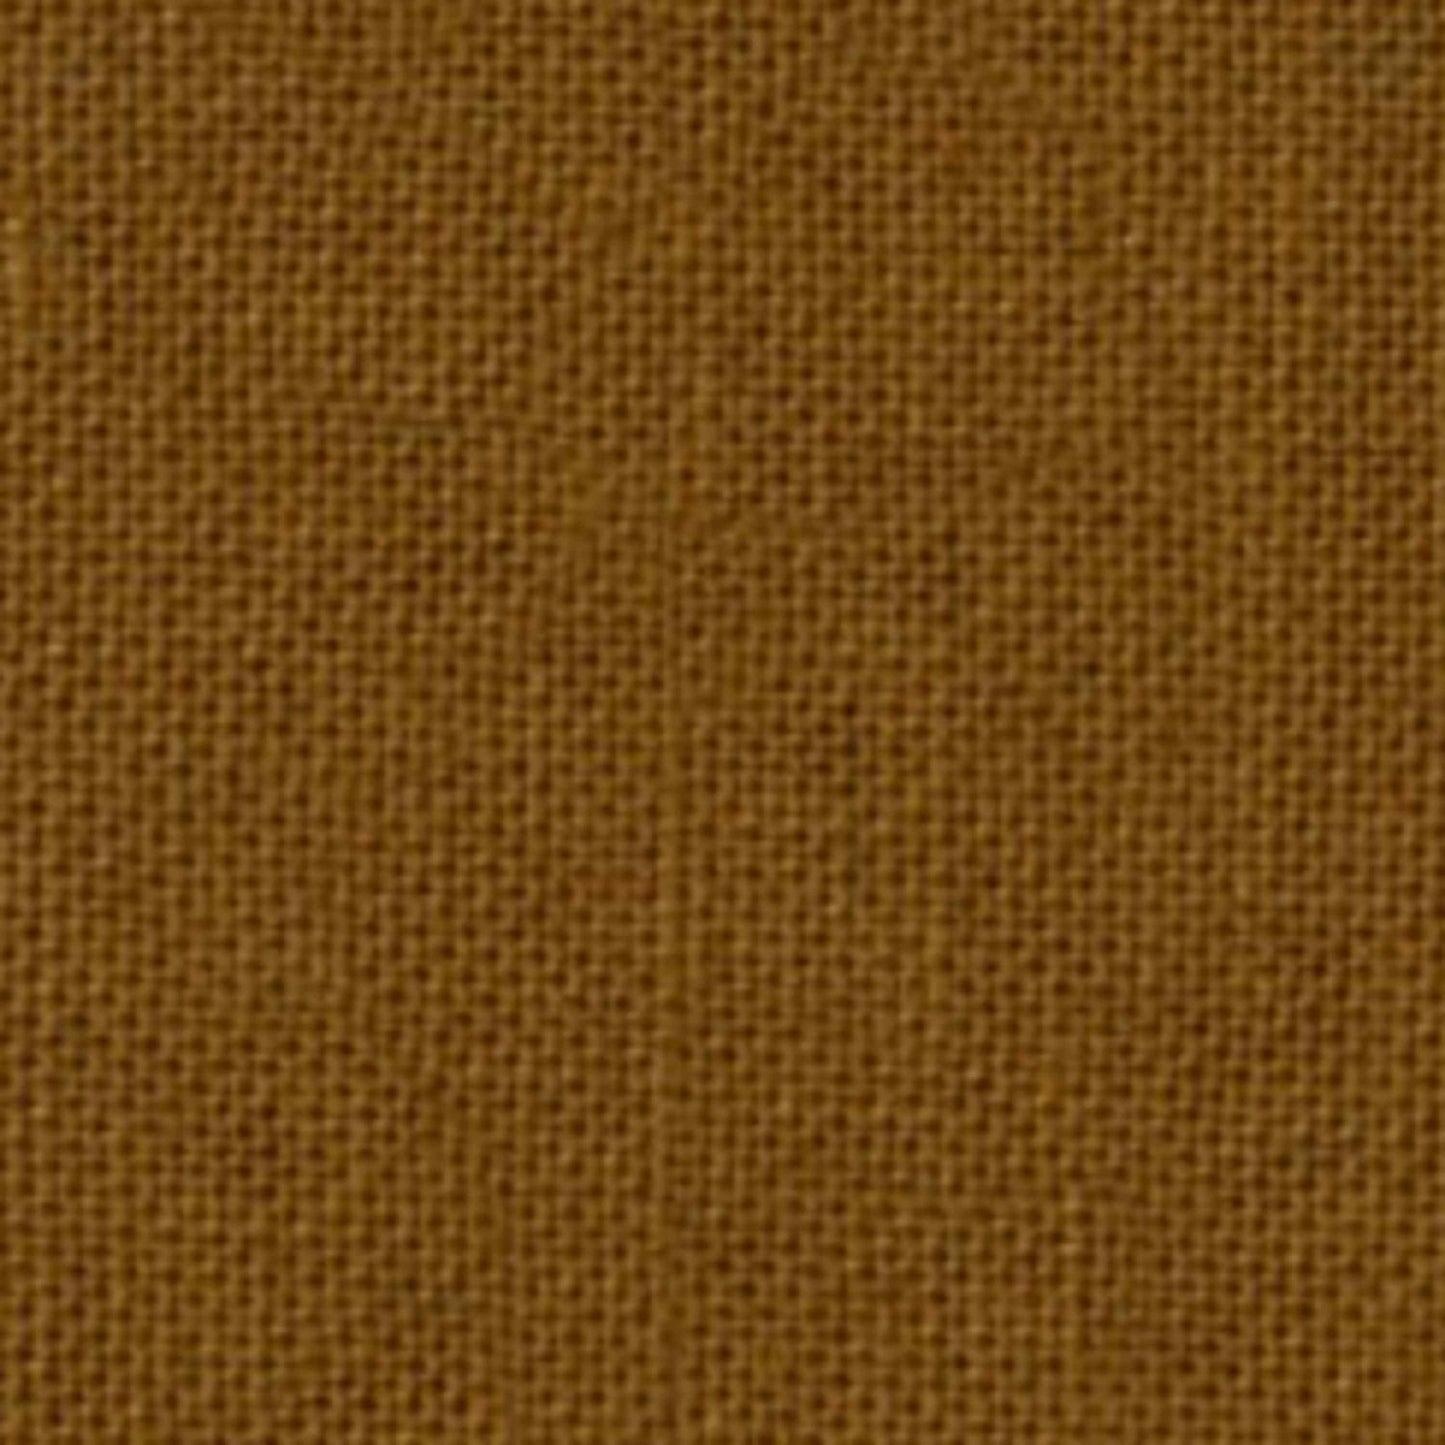 Fabric By The Yard - Toffee Cotton Couture Fabric - SC5333-TOFF